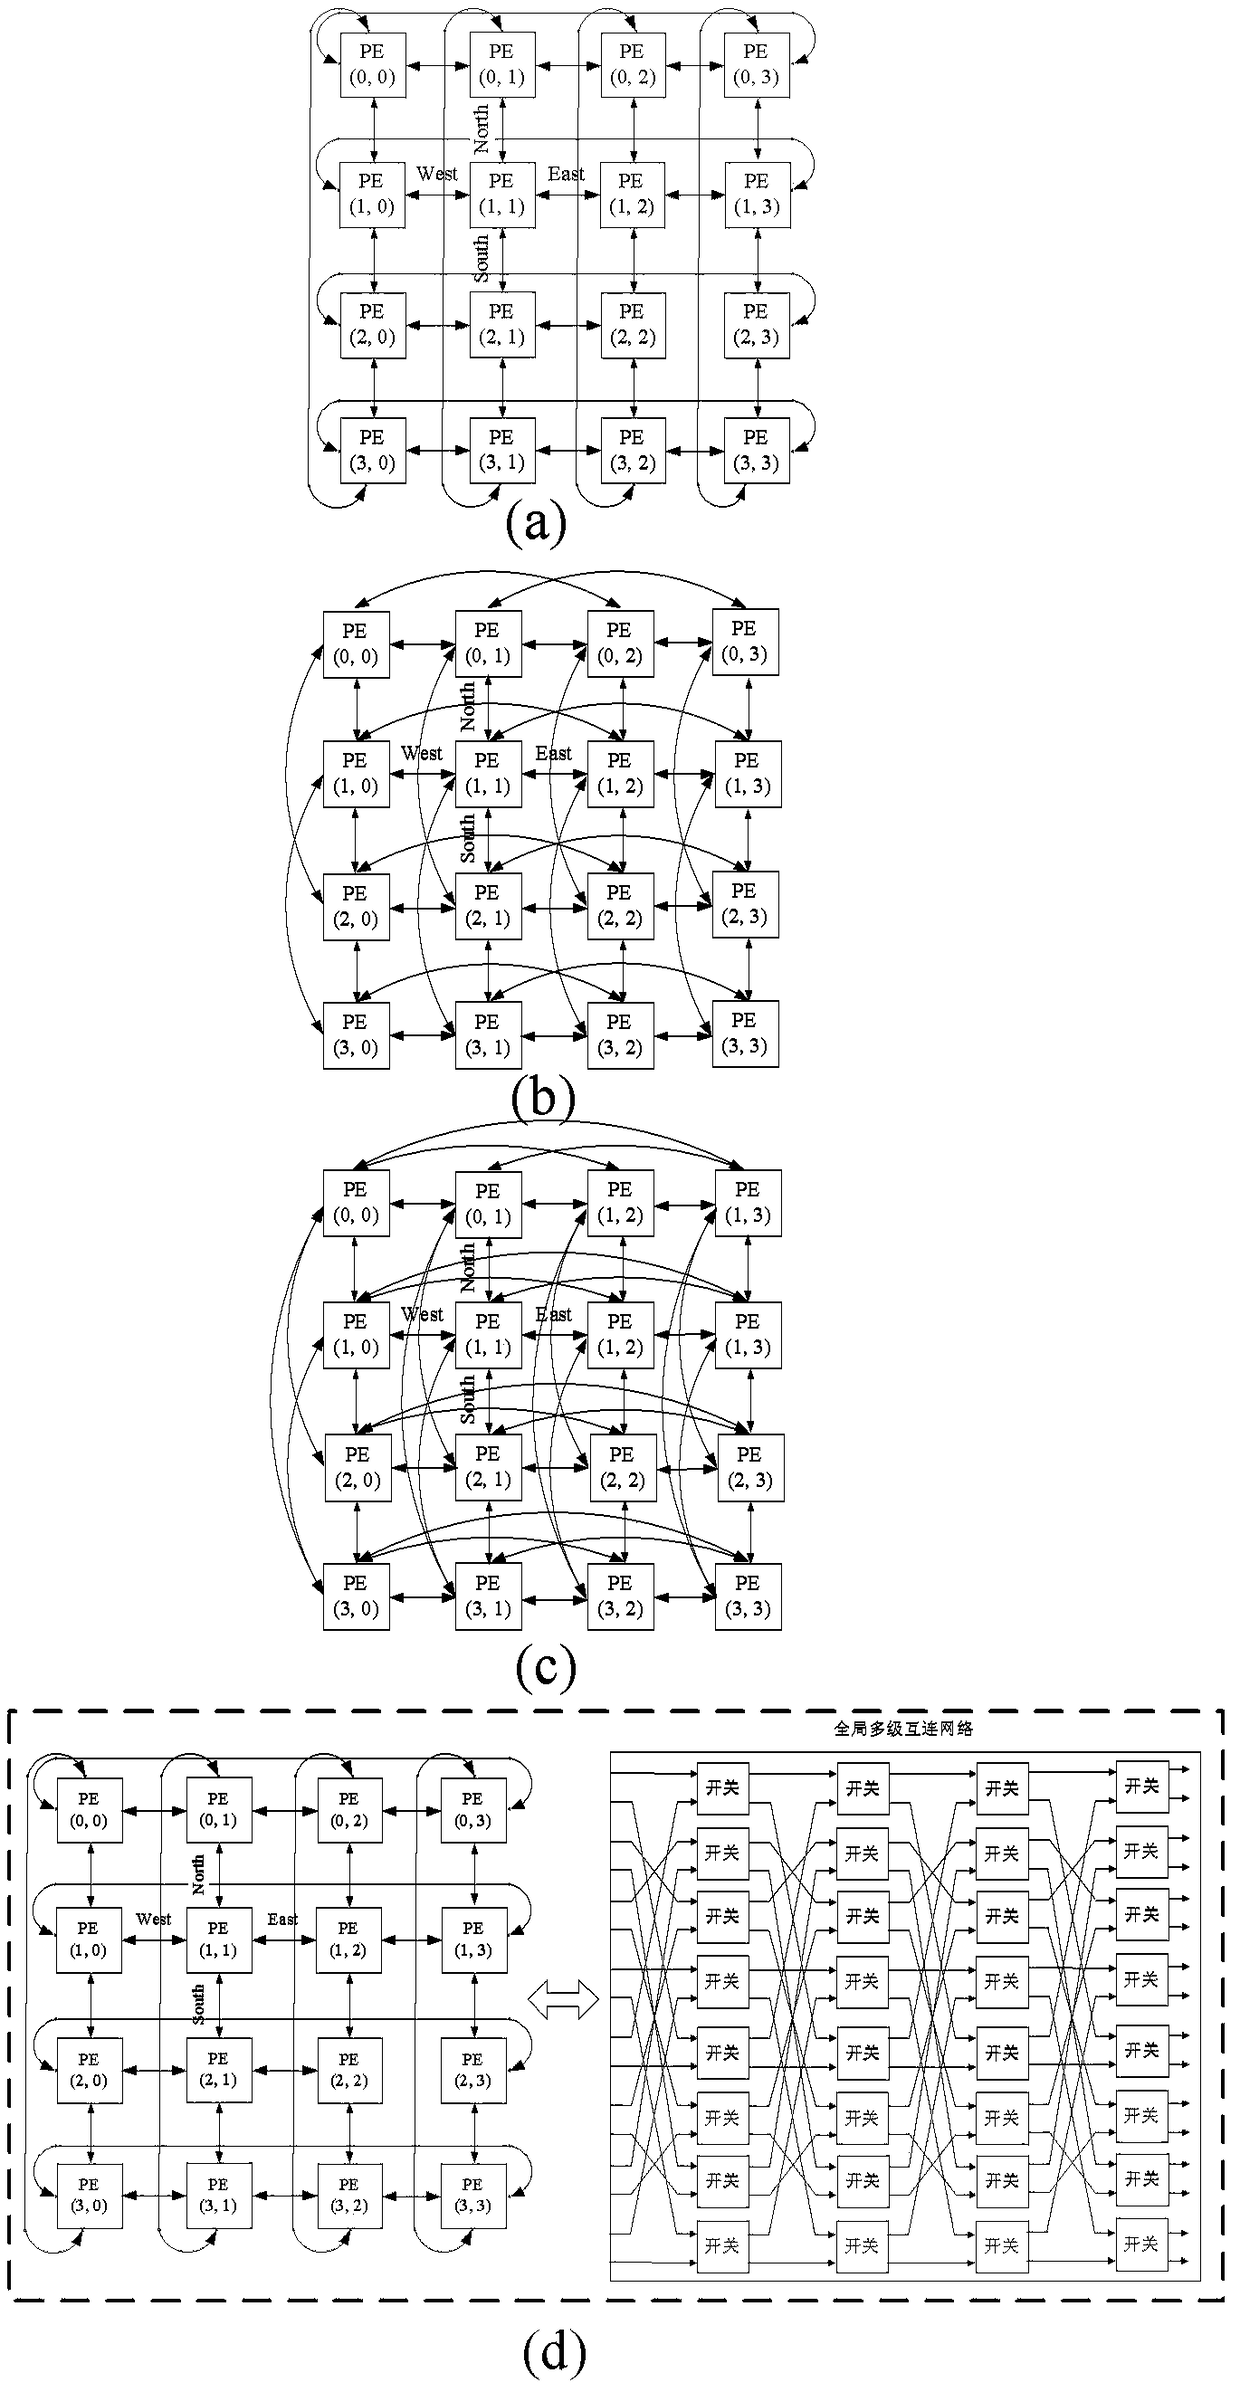 A Coarse-Grained Reconfigurable Array Circuit Based on Auto-routing Interconnect Network